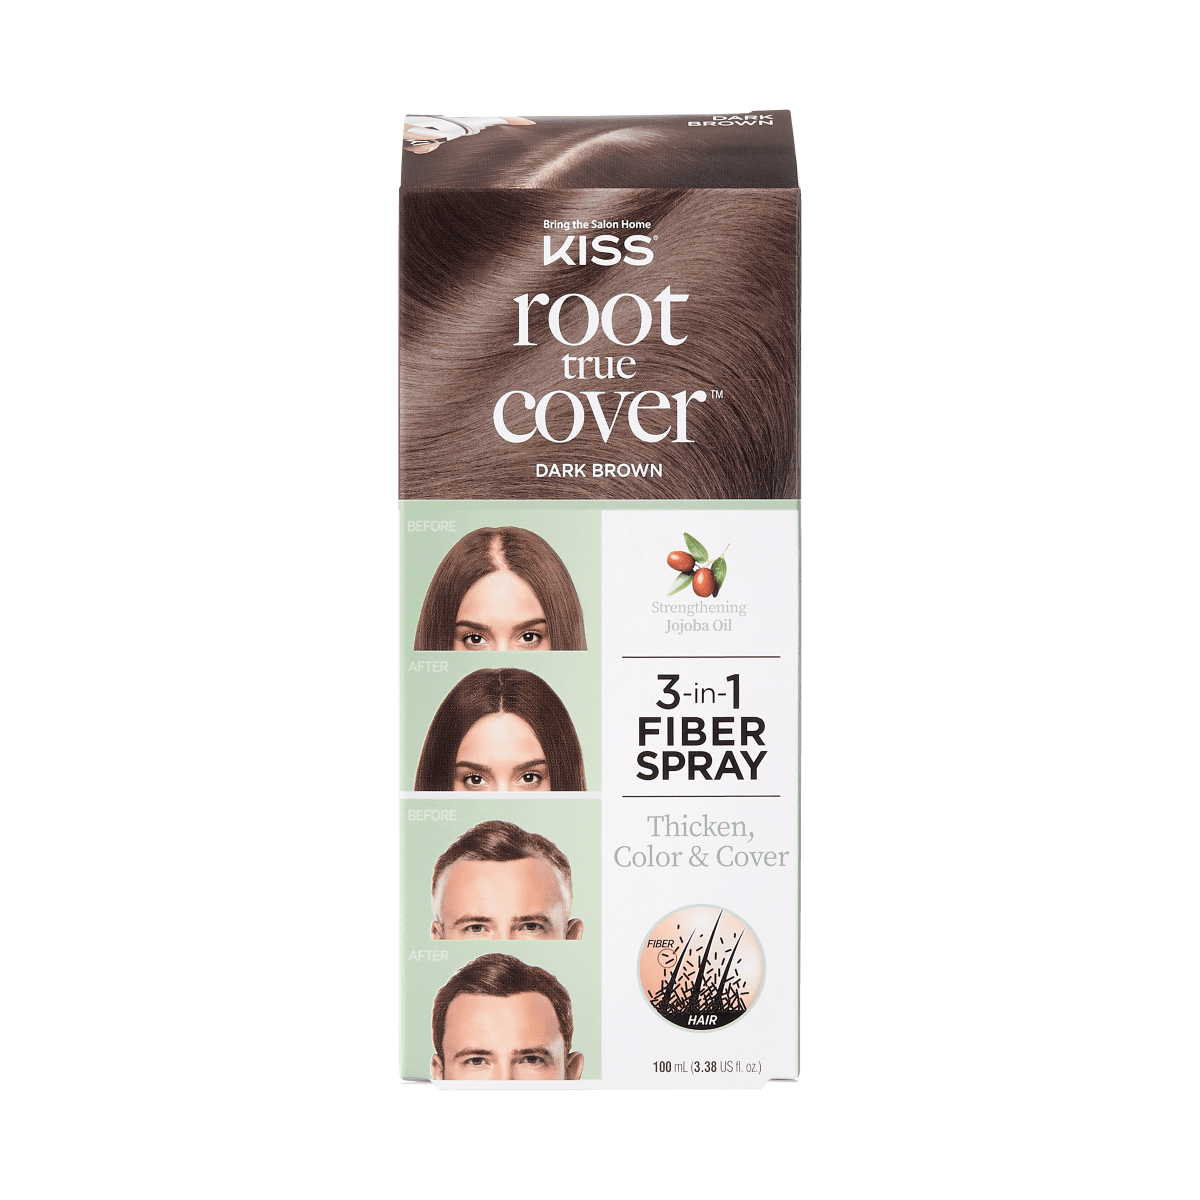 KISS Colors &amp; Care Root True Cover Hair Thickening Fiber Spray - Dark Brown